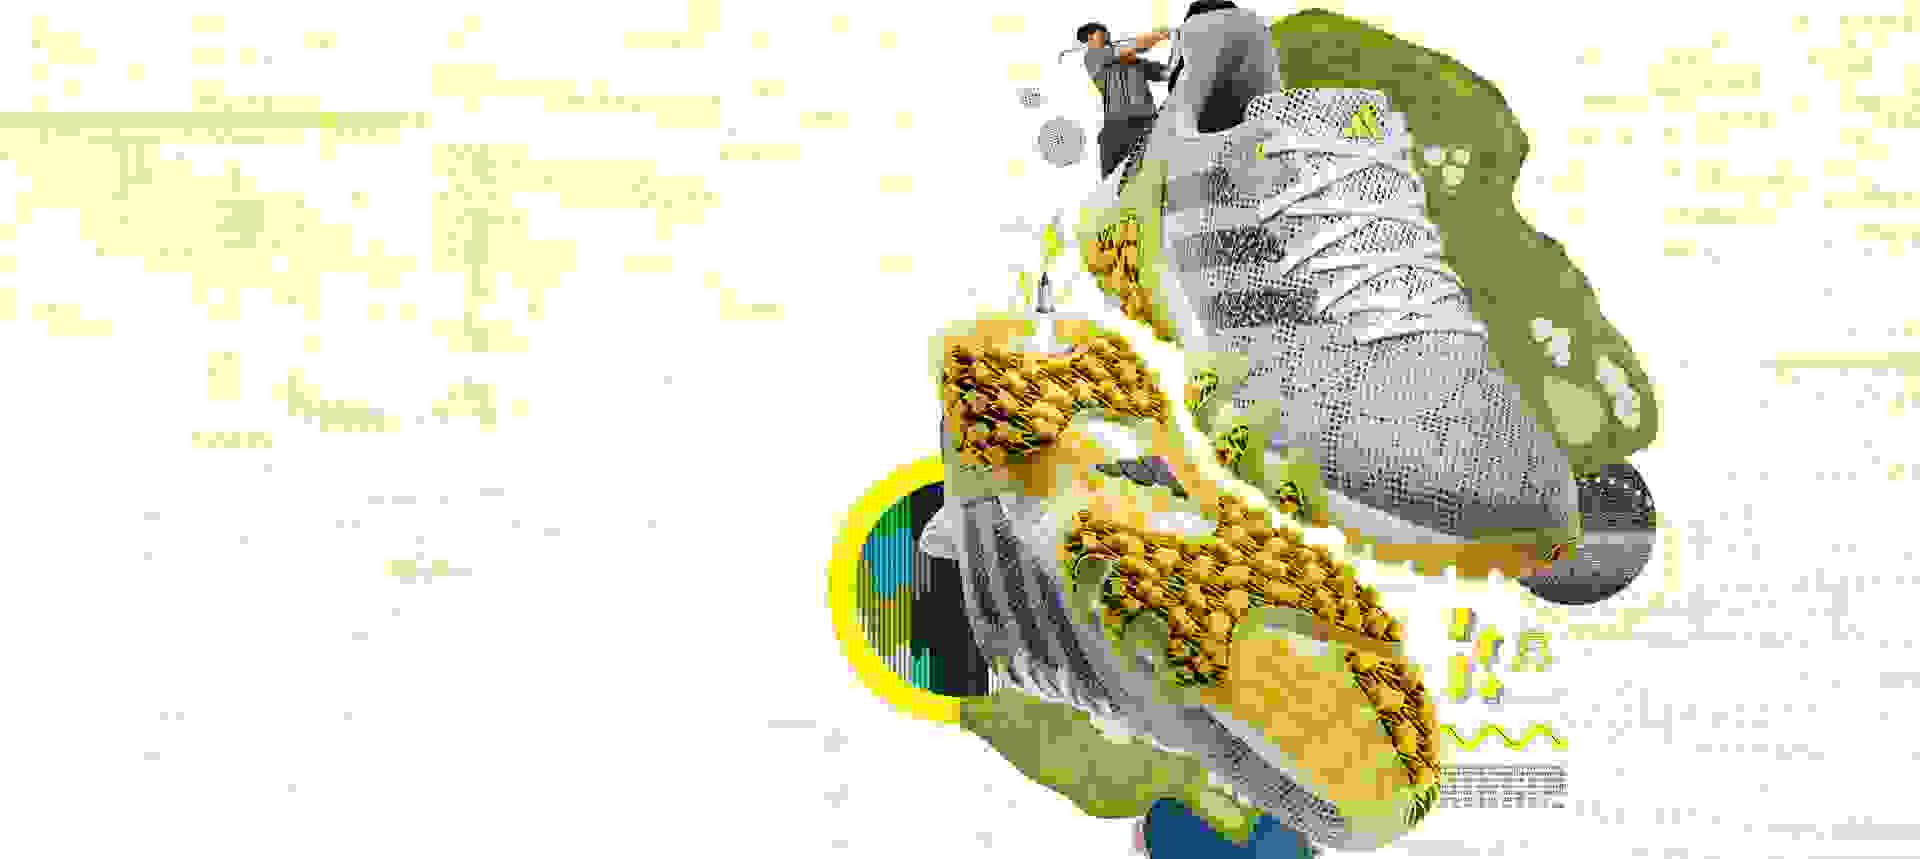 One CODECHAOS22 shoe showing laces, one CODECHAOS22 shoe showing bottom of the shoe surrounded by green and yellow design elements.